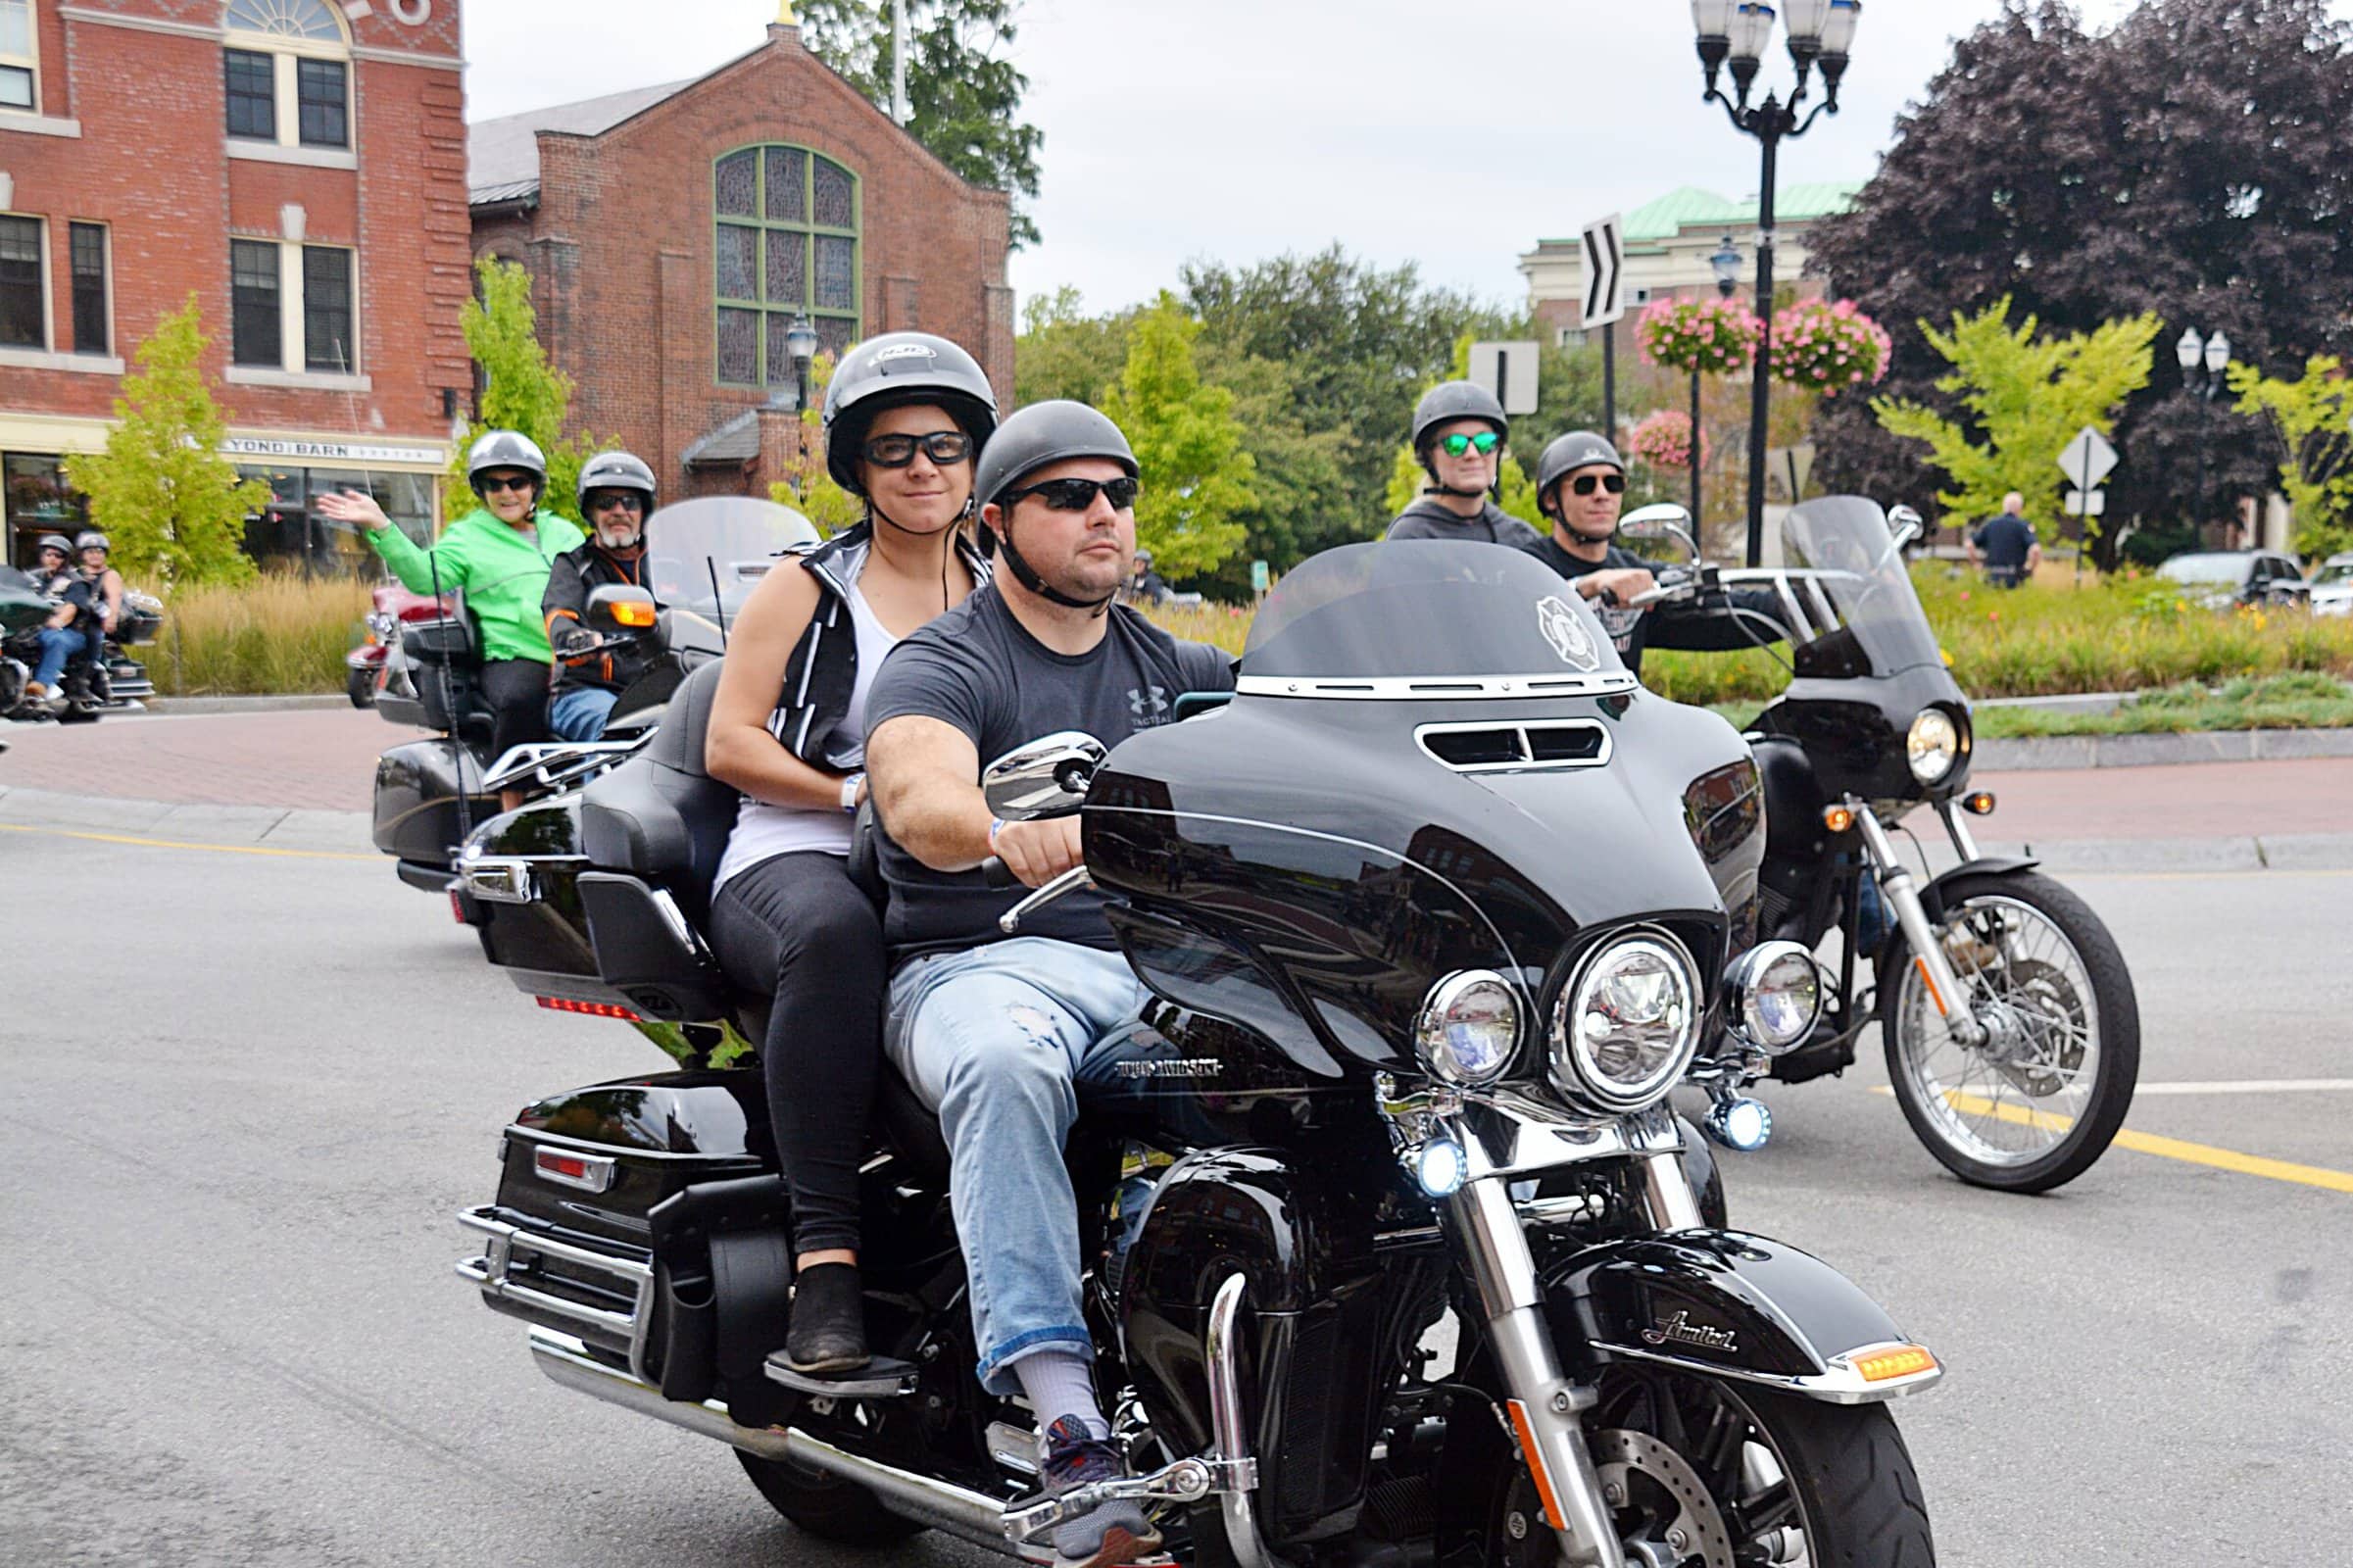 Hudson’s 12th motorcycle ride helps kids with cancer